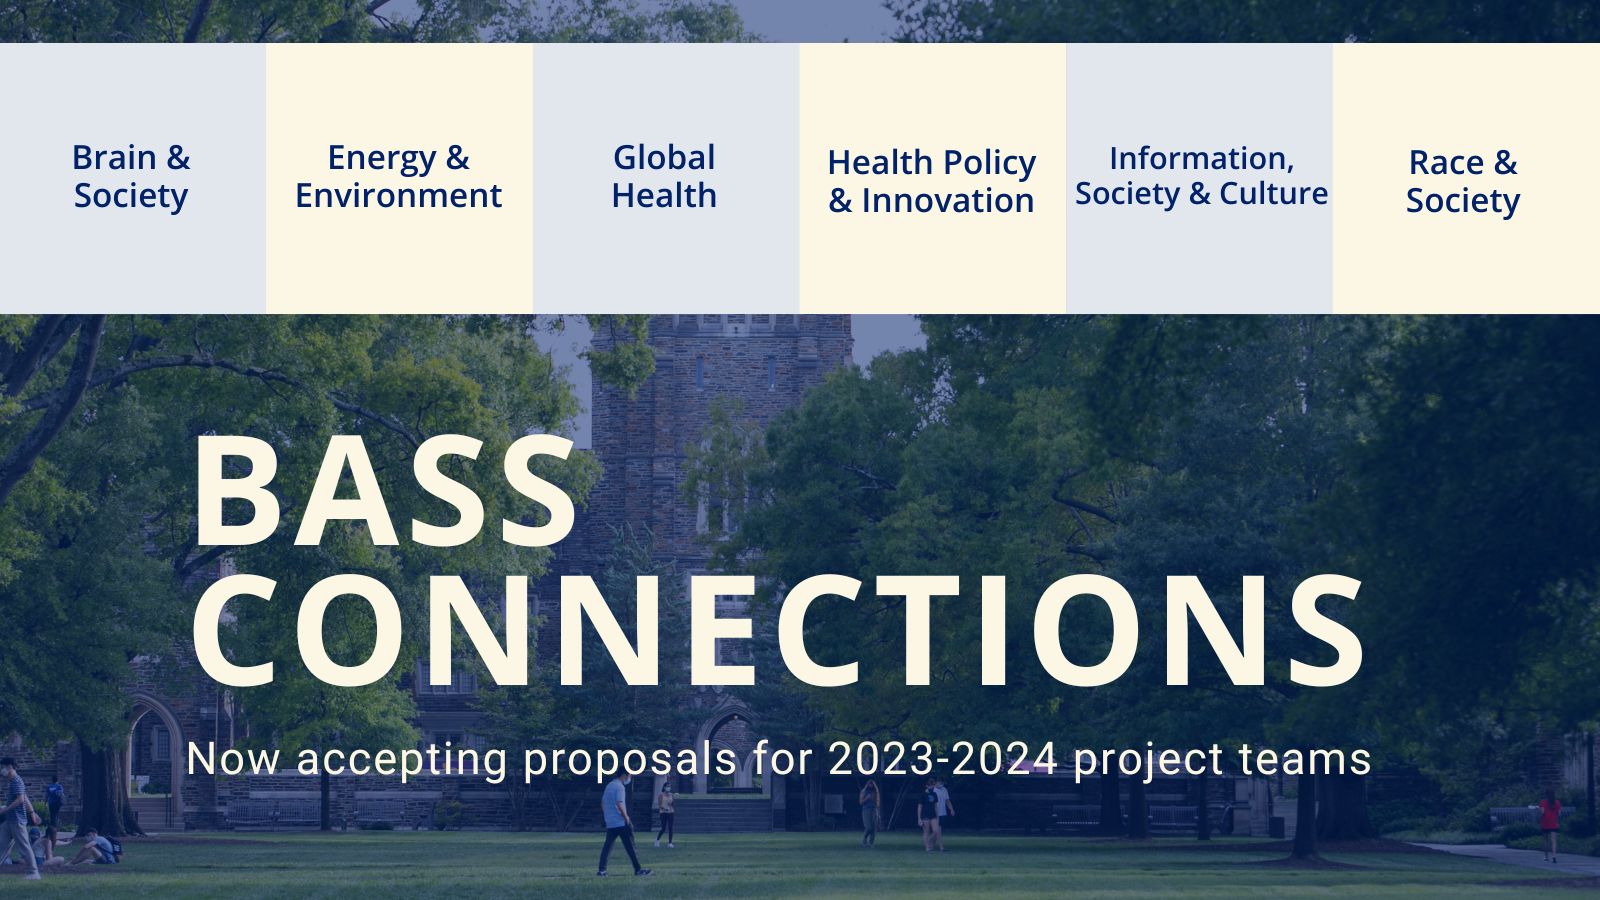 Bass Connections Invites Proposals for 20232024 Projects by November 7